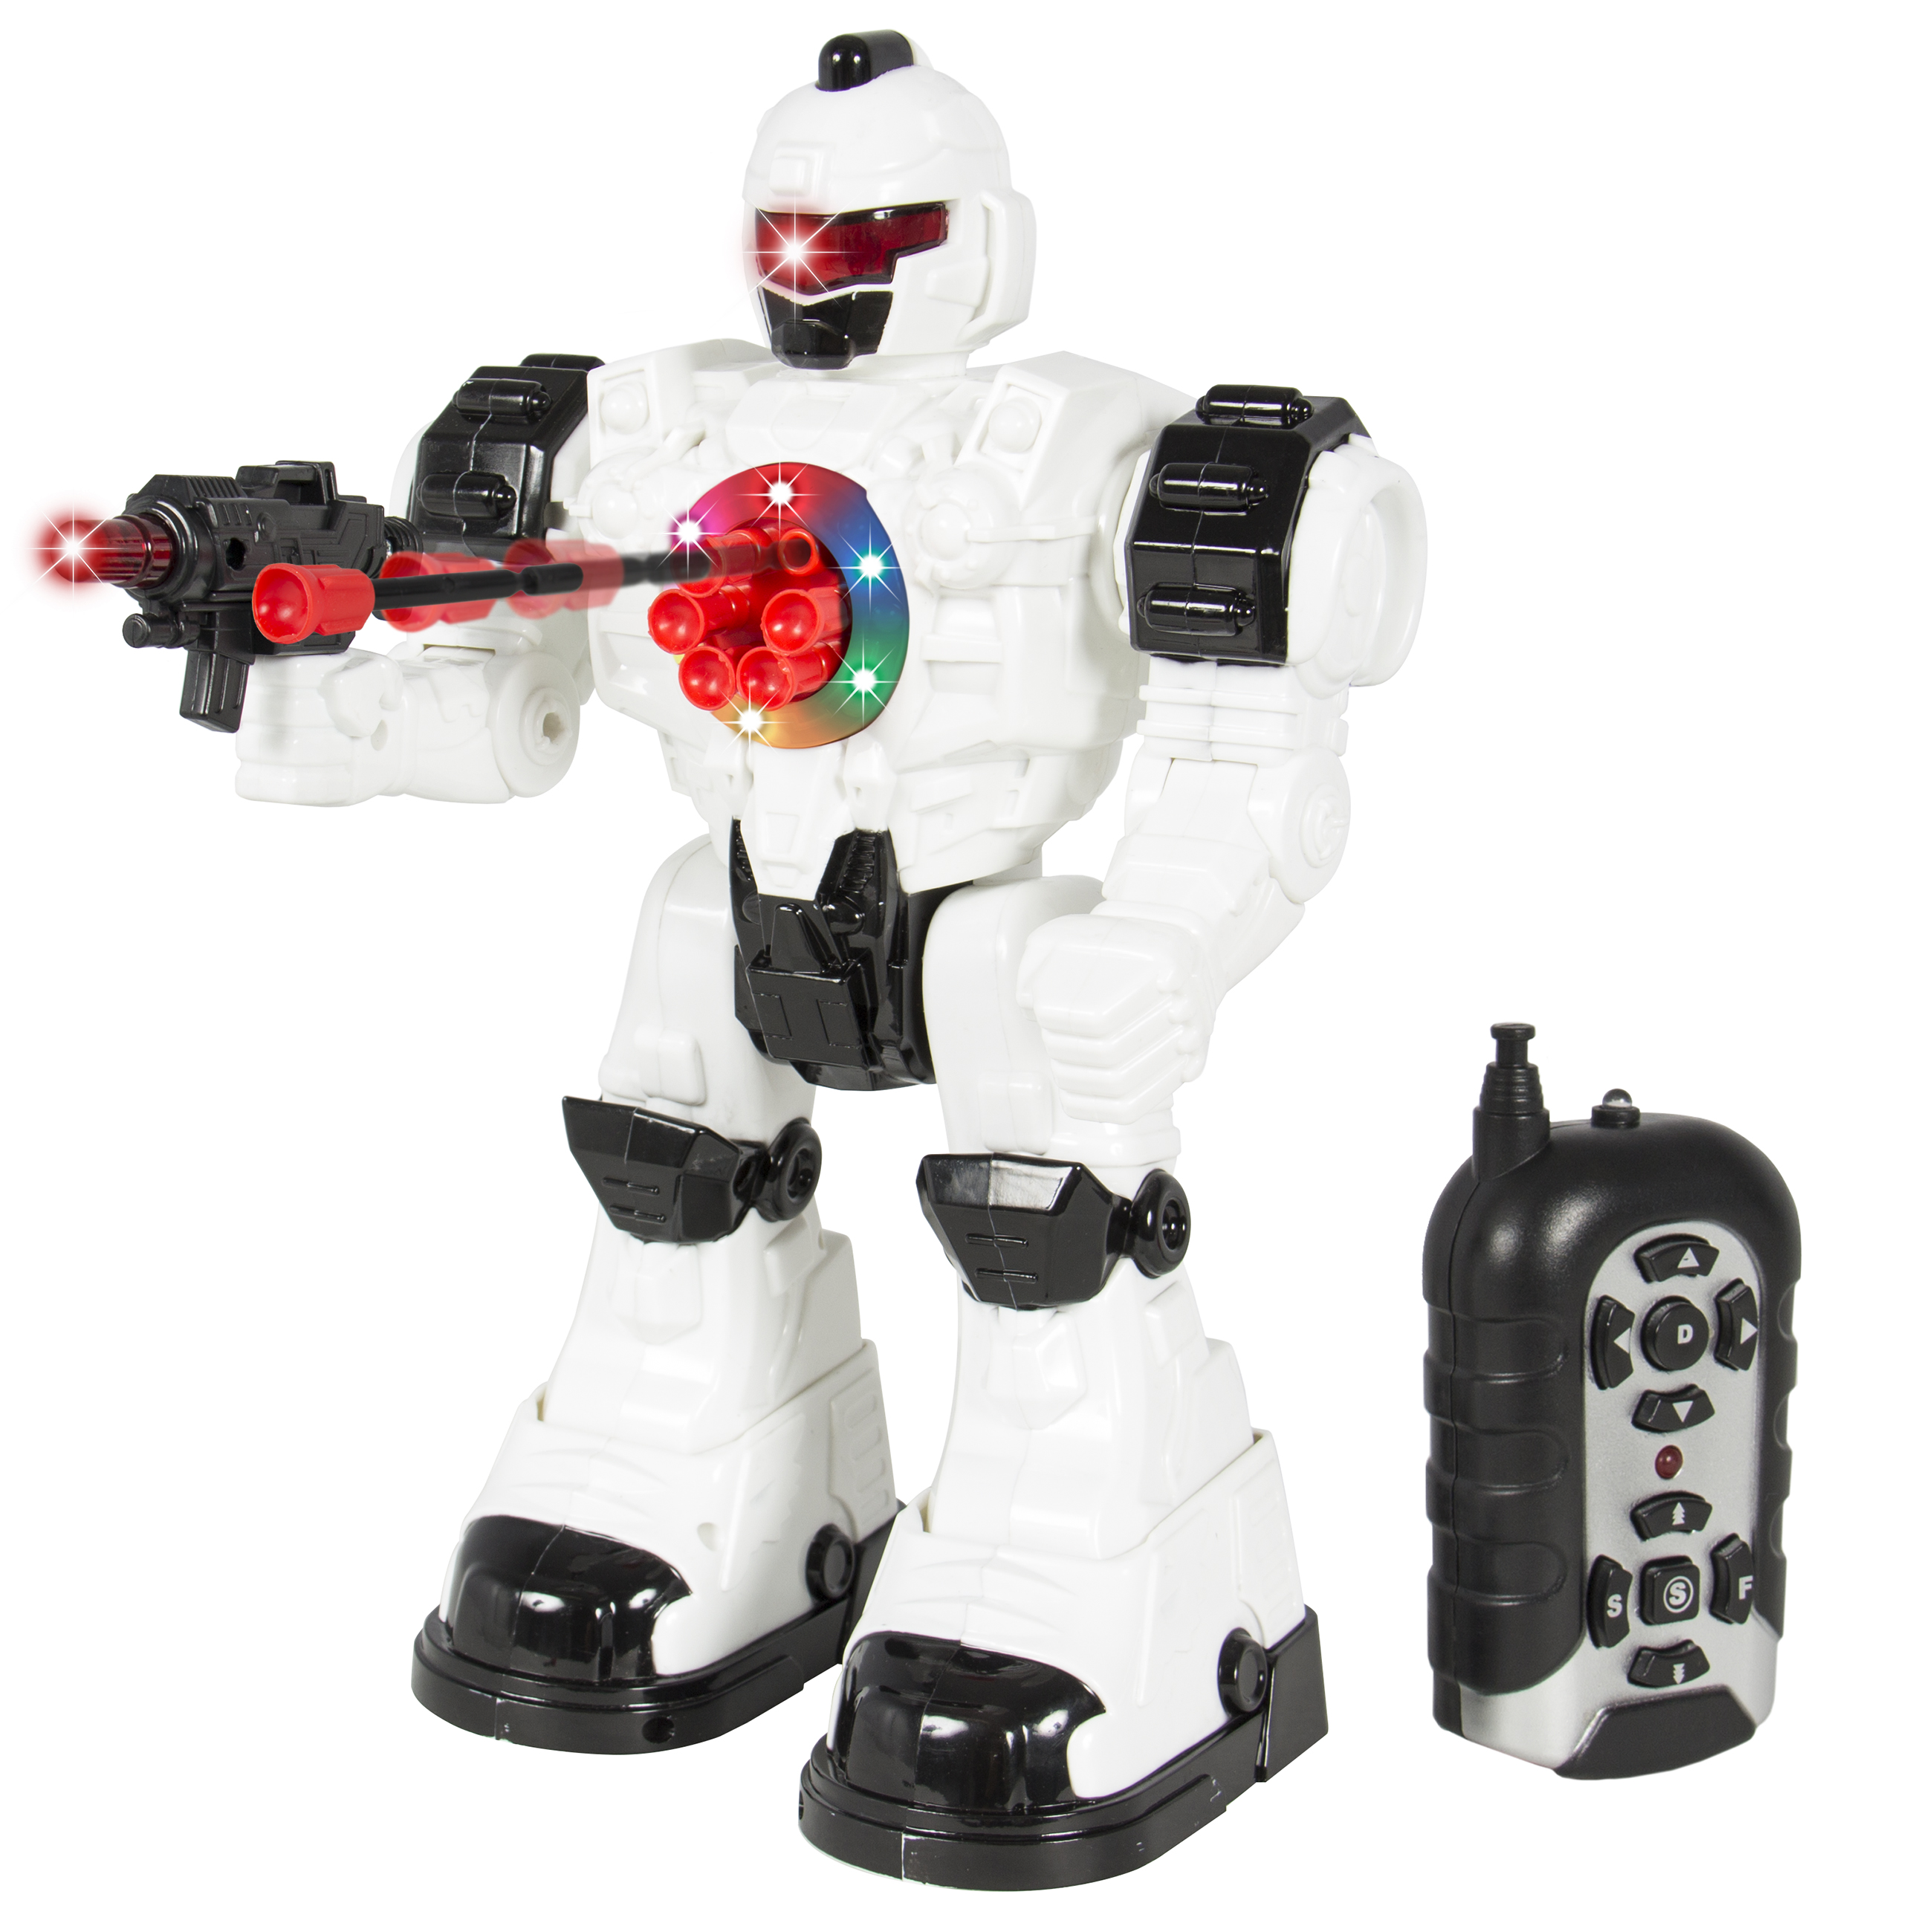 Best Choice Products Kids Remote Control Fight Battle Robot Toy w/ Walking, Dancing, Shooting Actions, Lights, Sounds - image 1 of 5